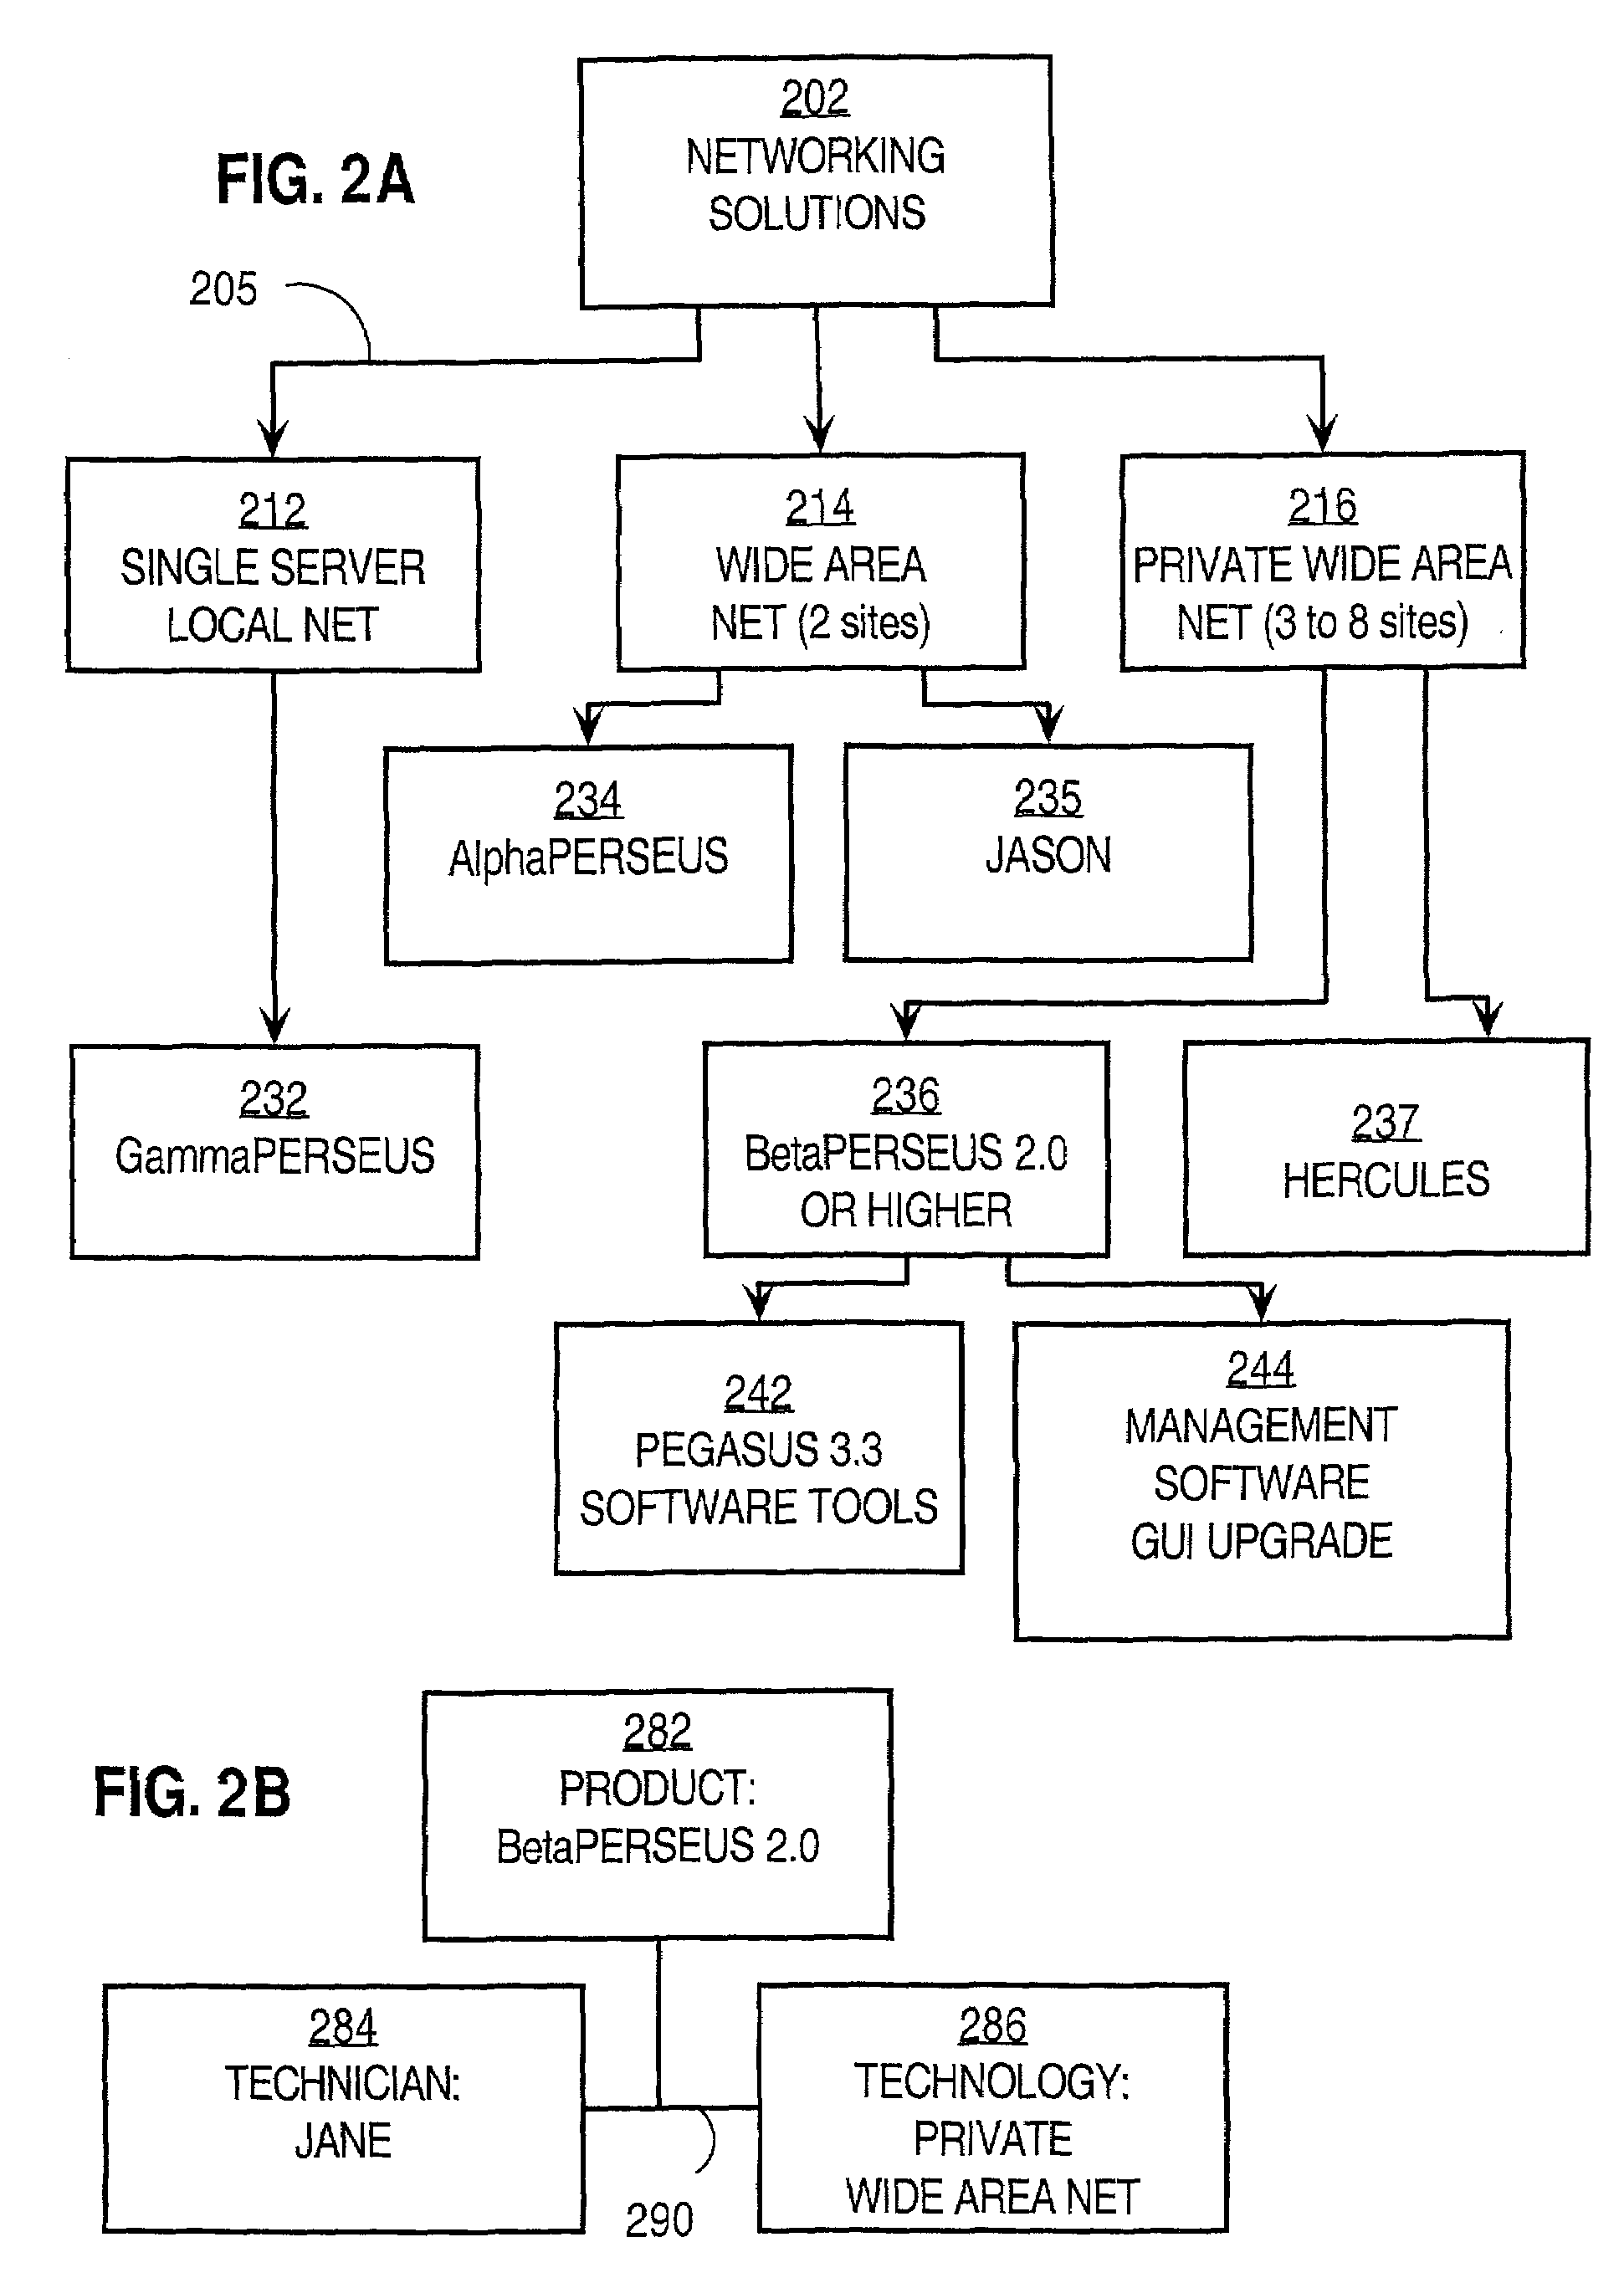 Business vocabulary data storage using multiple inter-related hierarchies